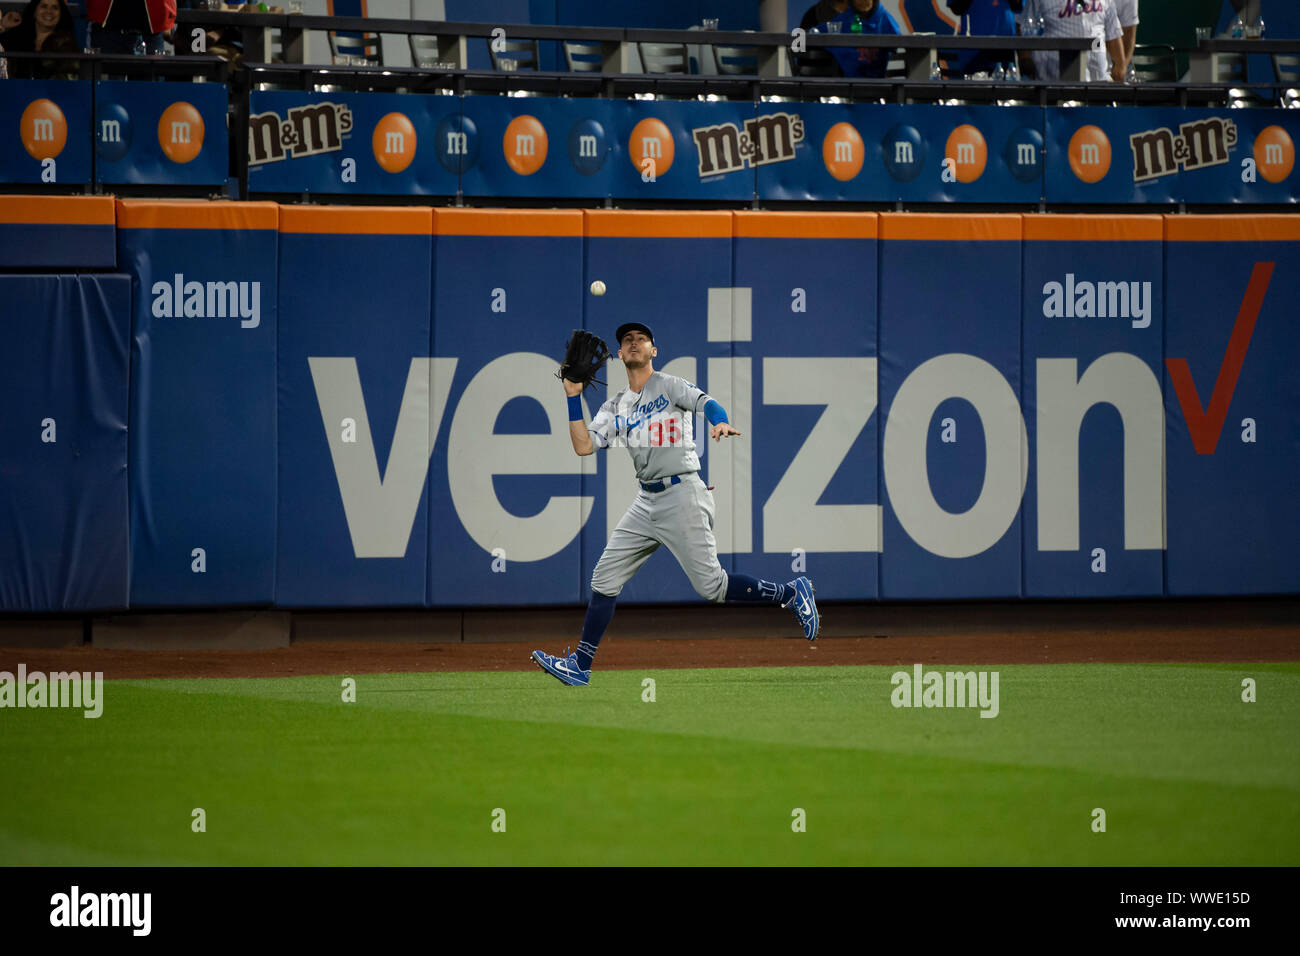 Queens, New York, USA. 13th Sep, 2019. Los Angeles Dodgers right fielder Cody Bellinger (35) tracks down a fly ball during the game between The New York Mets and The Los Angeles Dodgers at Citi Field in Queens, New York. Mandatory credit: Kostas Lymperopoulos/CSM/Alamy Live News Stock Photo